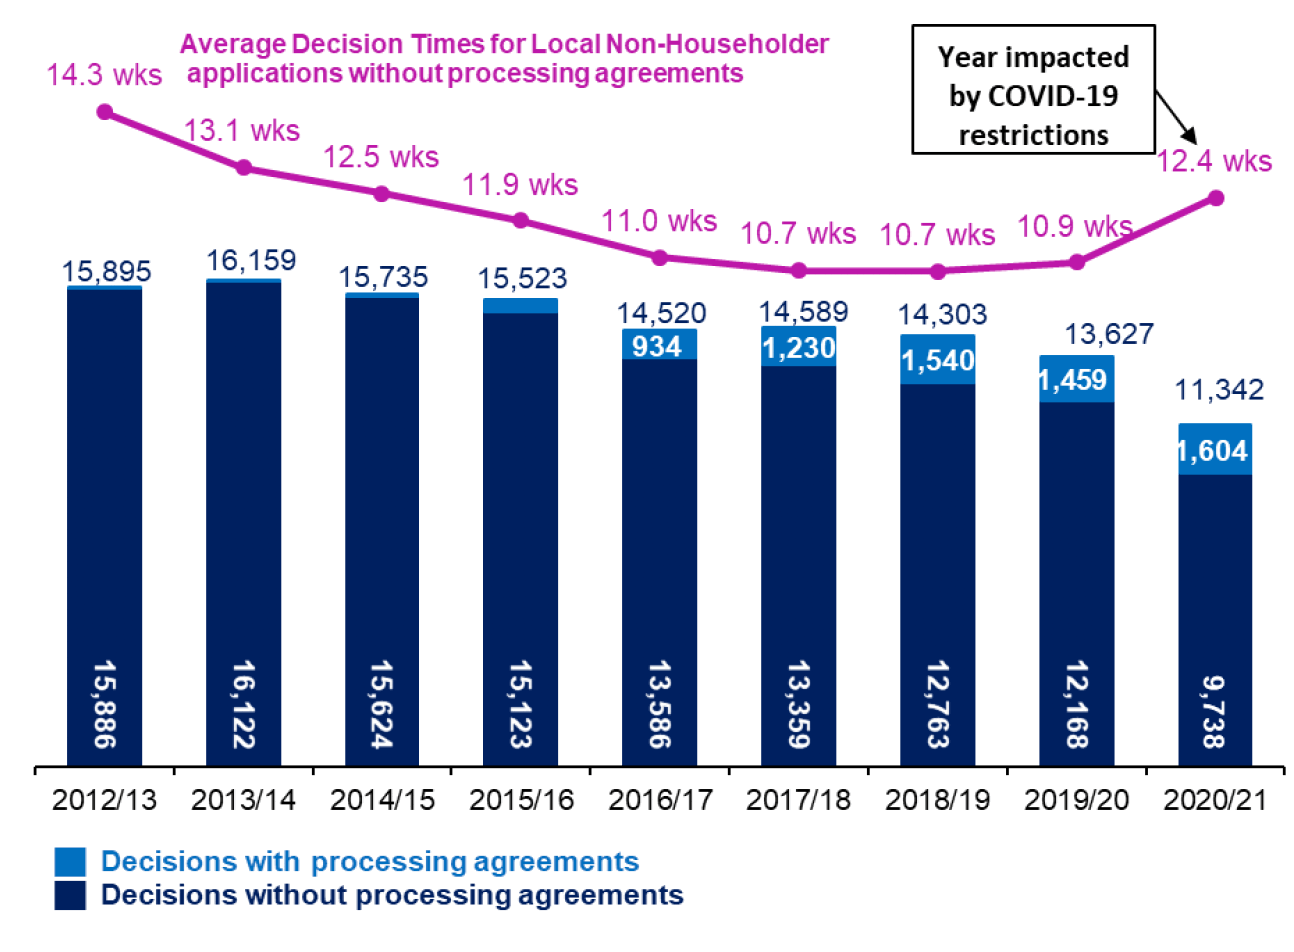 Chart showing annual trends since 2012/13 in number of applications determined and average decision times for local non-householder applications